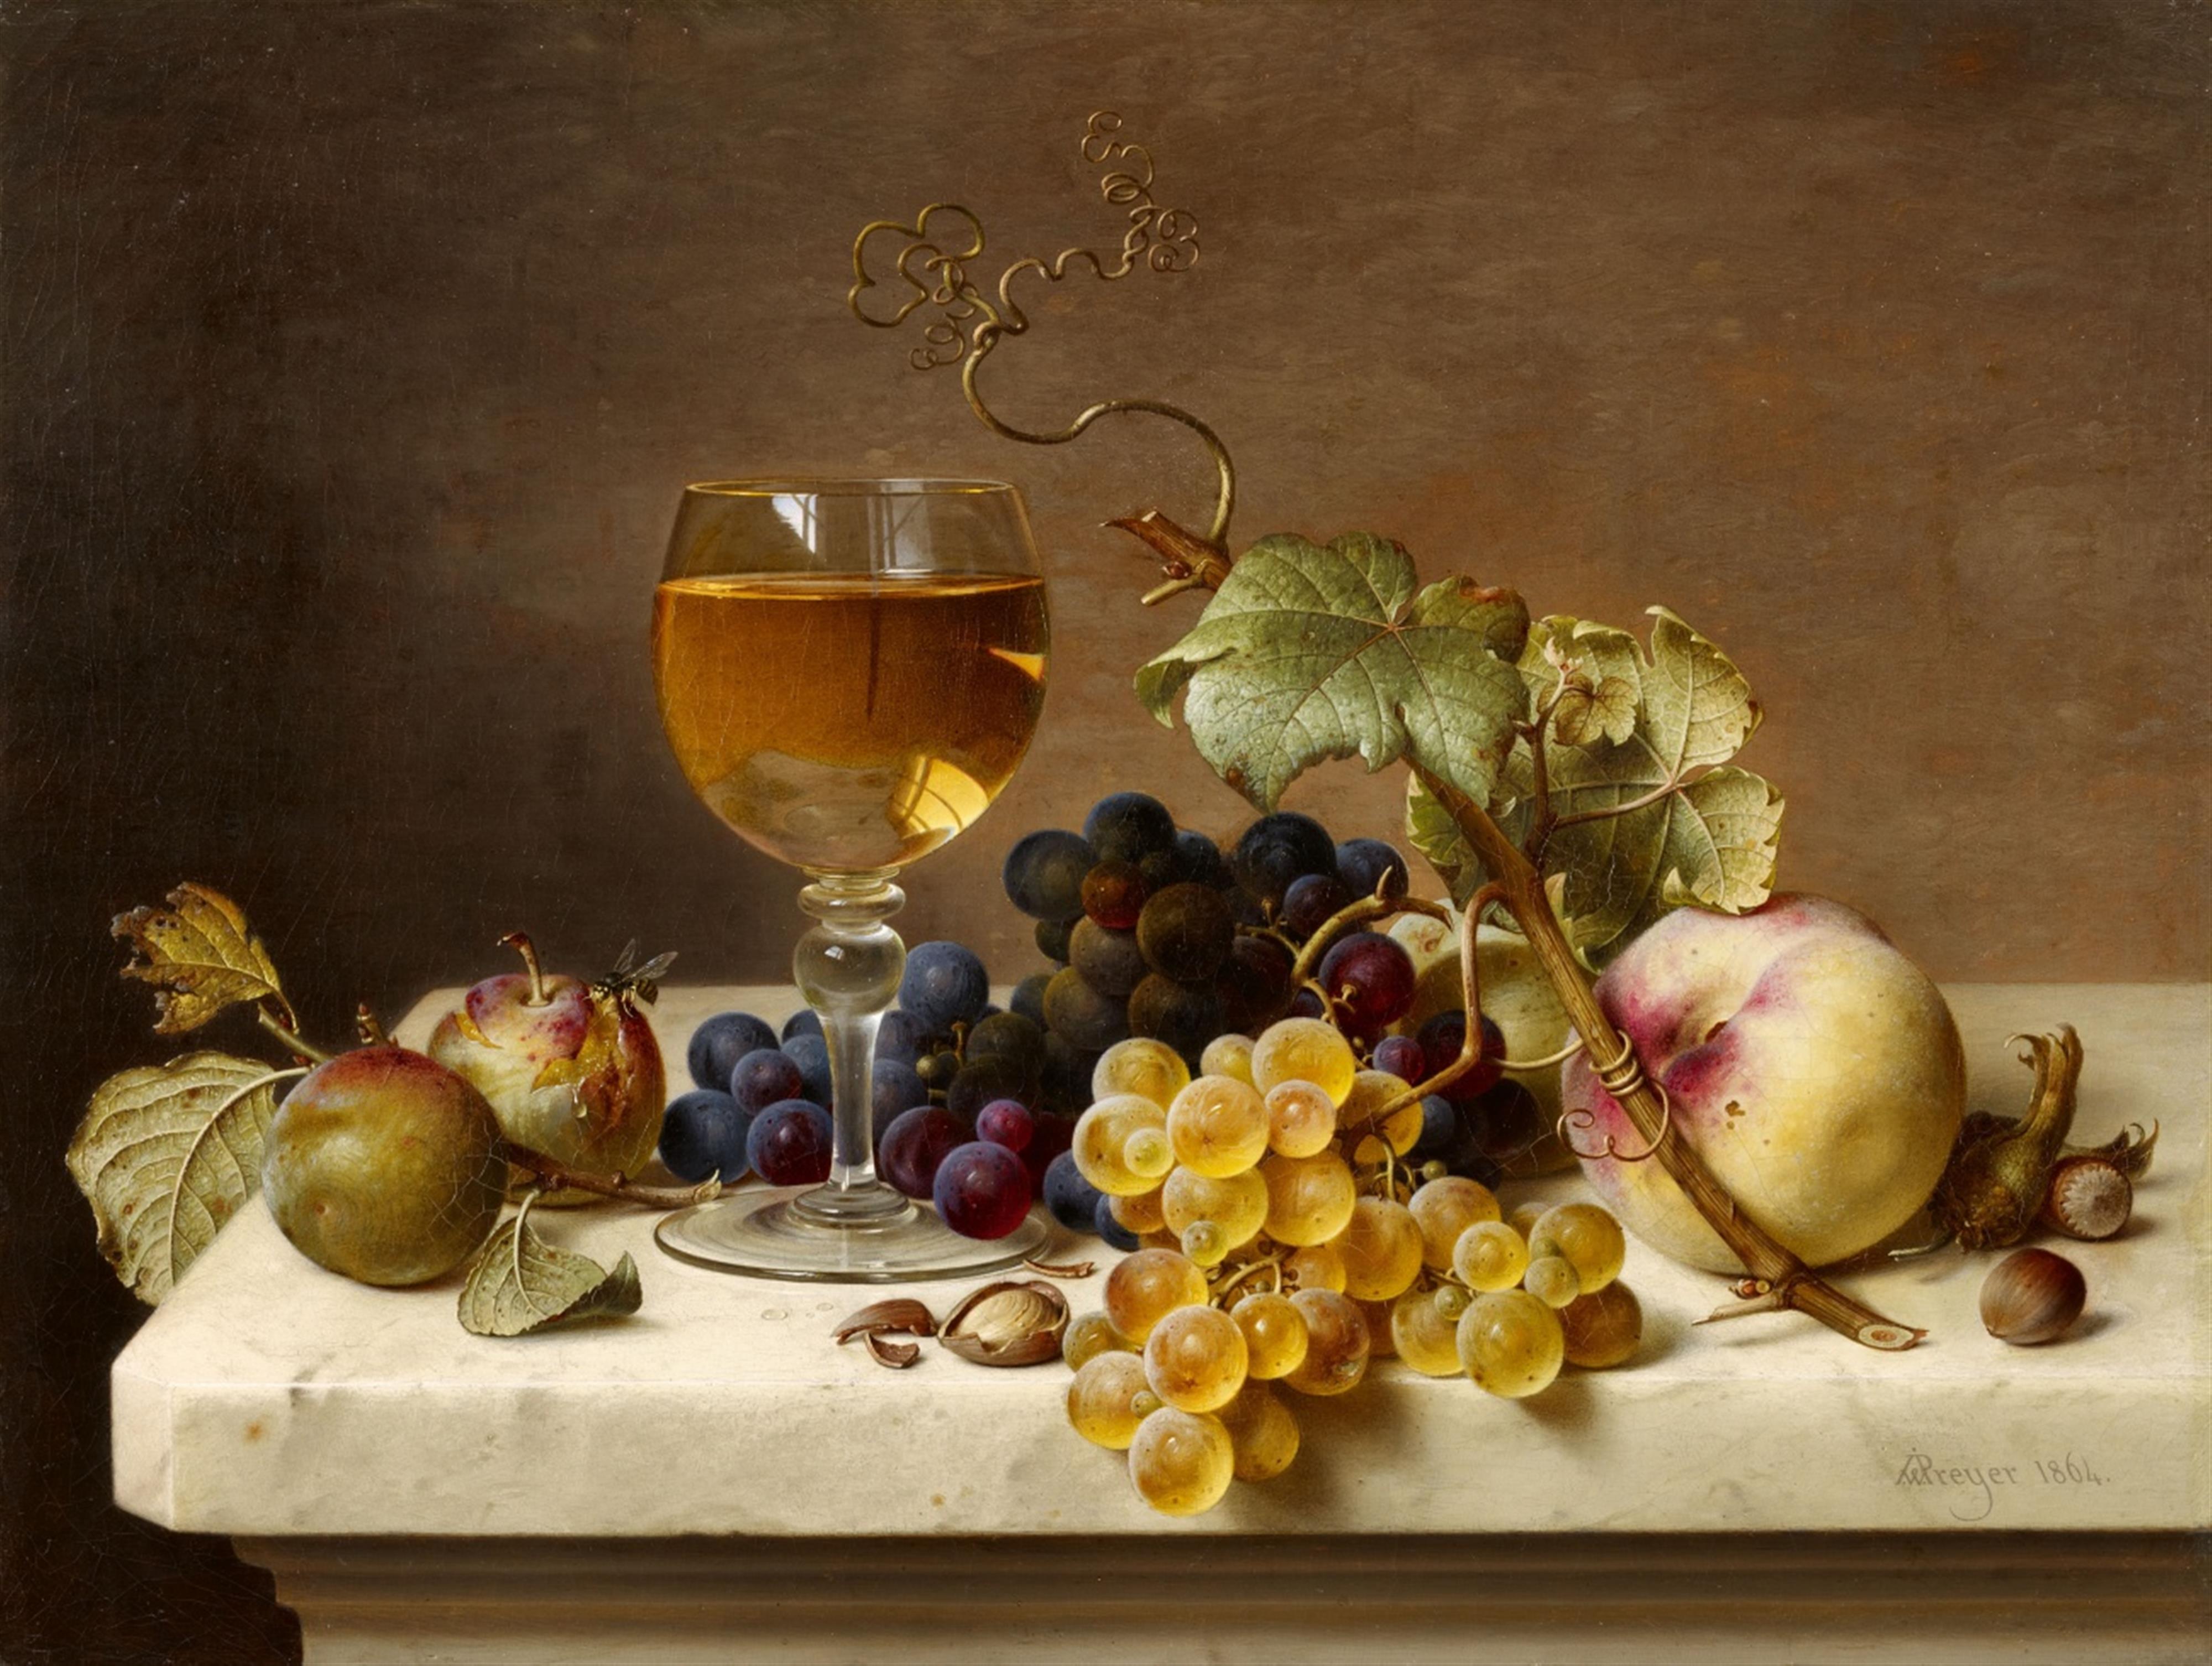 Johann Wilhelm Preyer - Fruit Still Life with Greengages, a Glass of Wine, Grapes, Peaches, and Hazelnuts on a Marble Slab - image-1